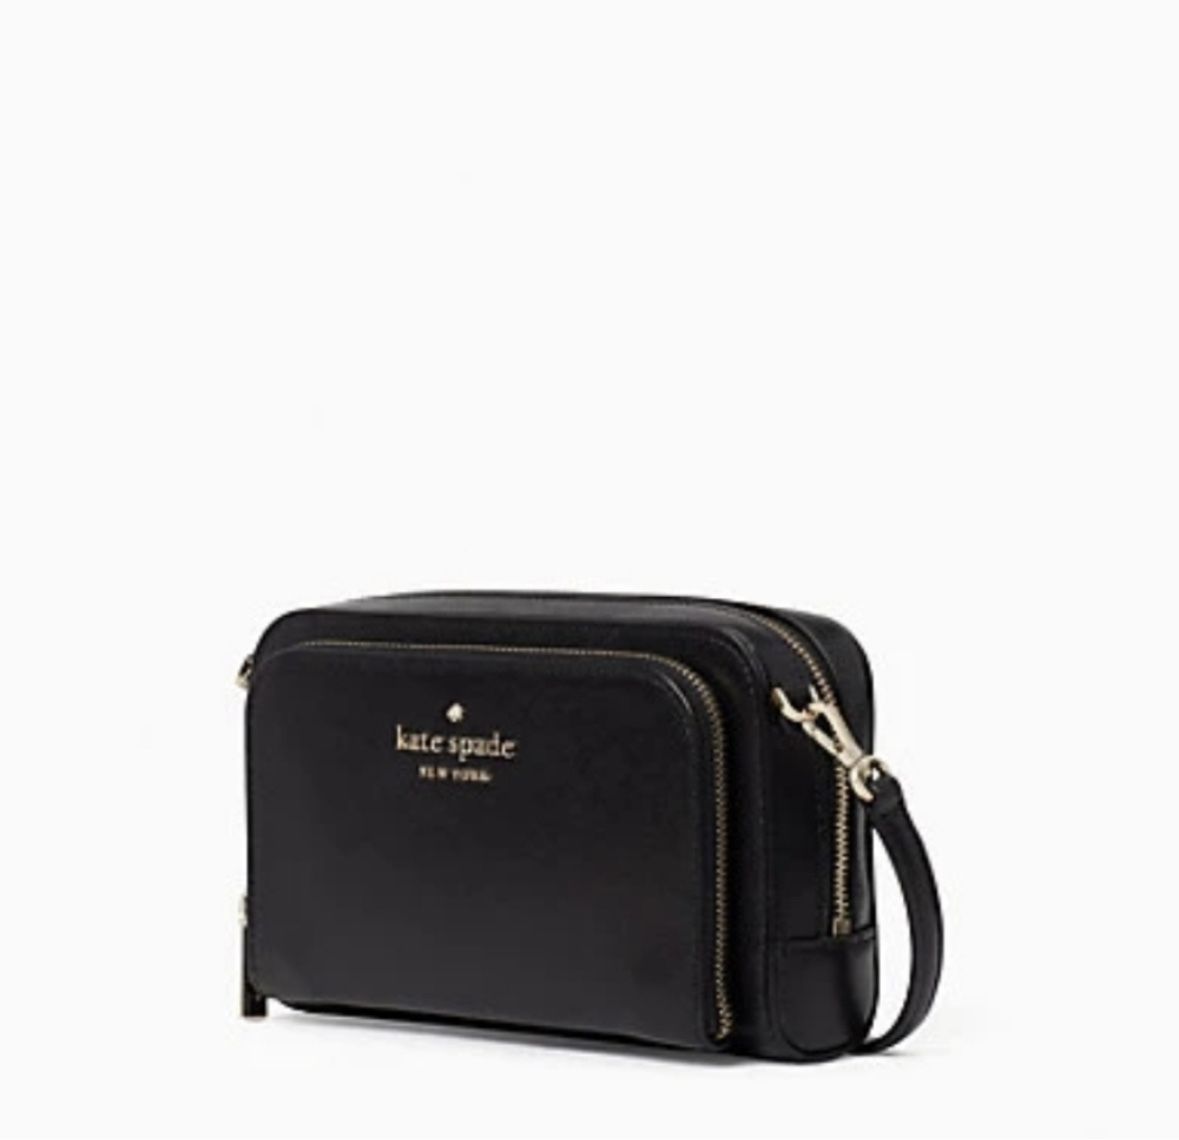 Kate Spade staci dual zip around crossbody for Sale in Lamont, CA - OfferUp